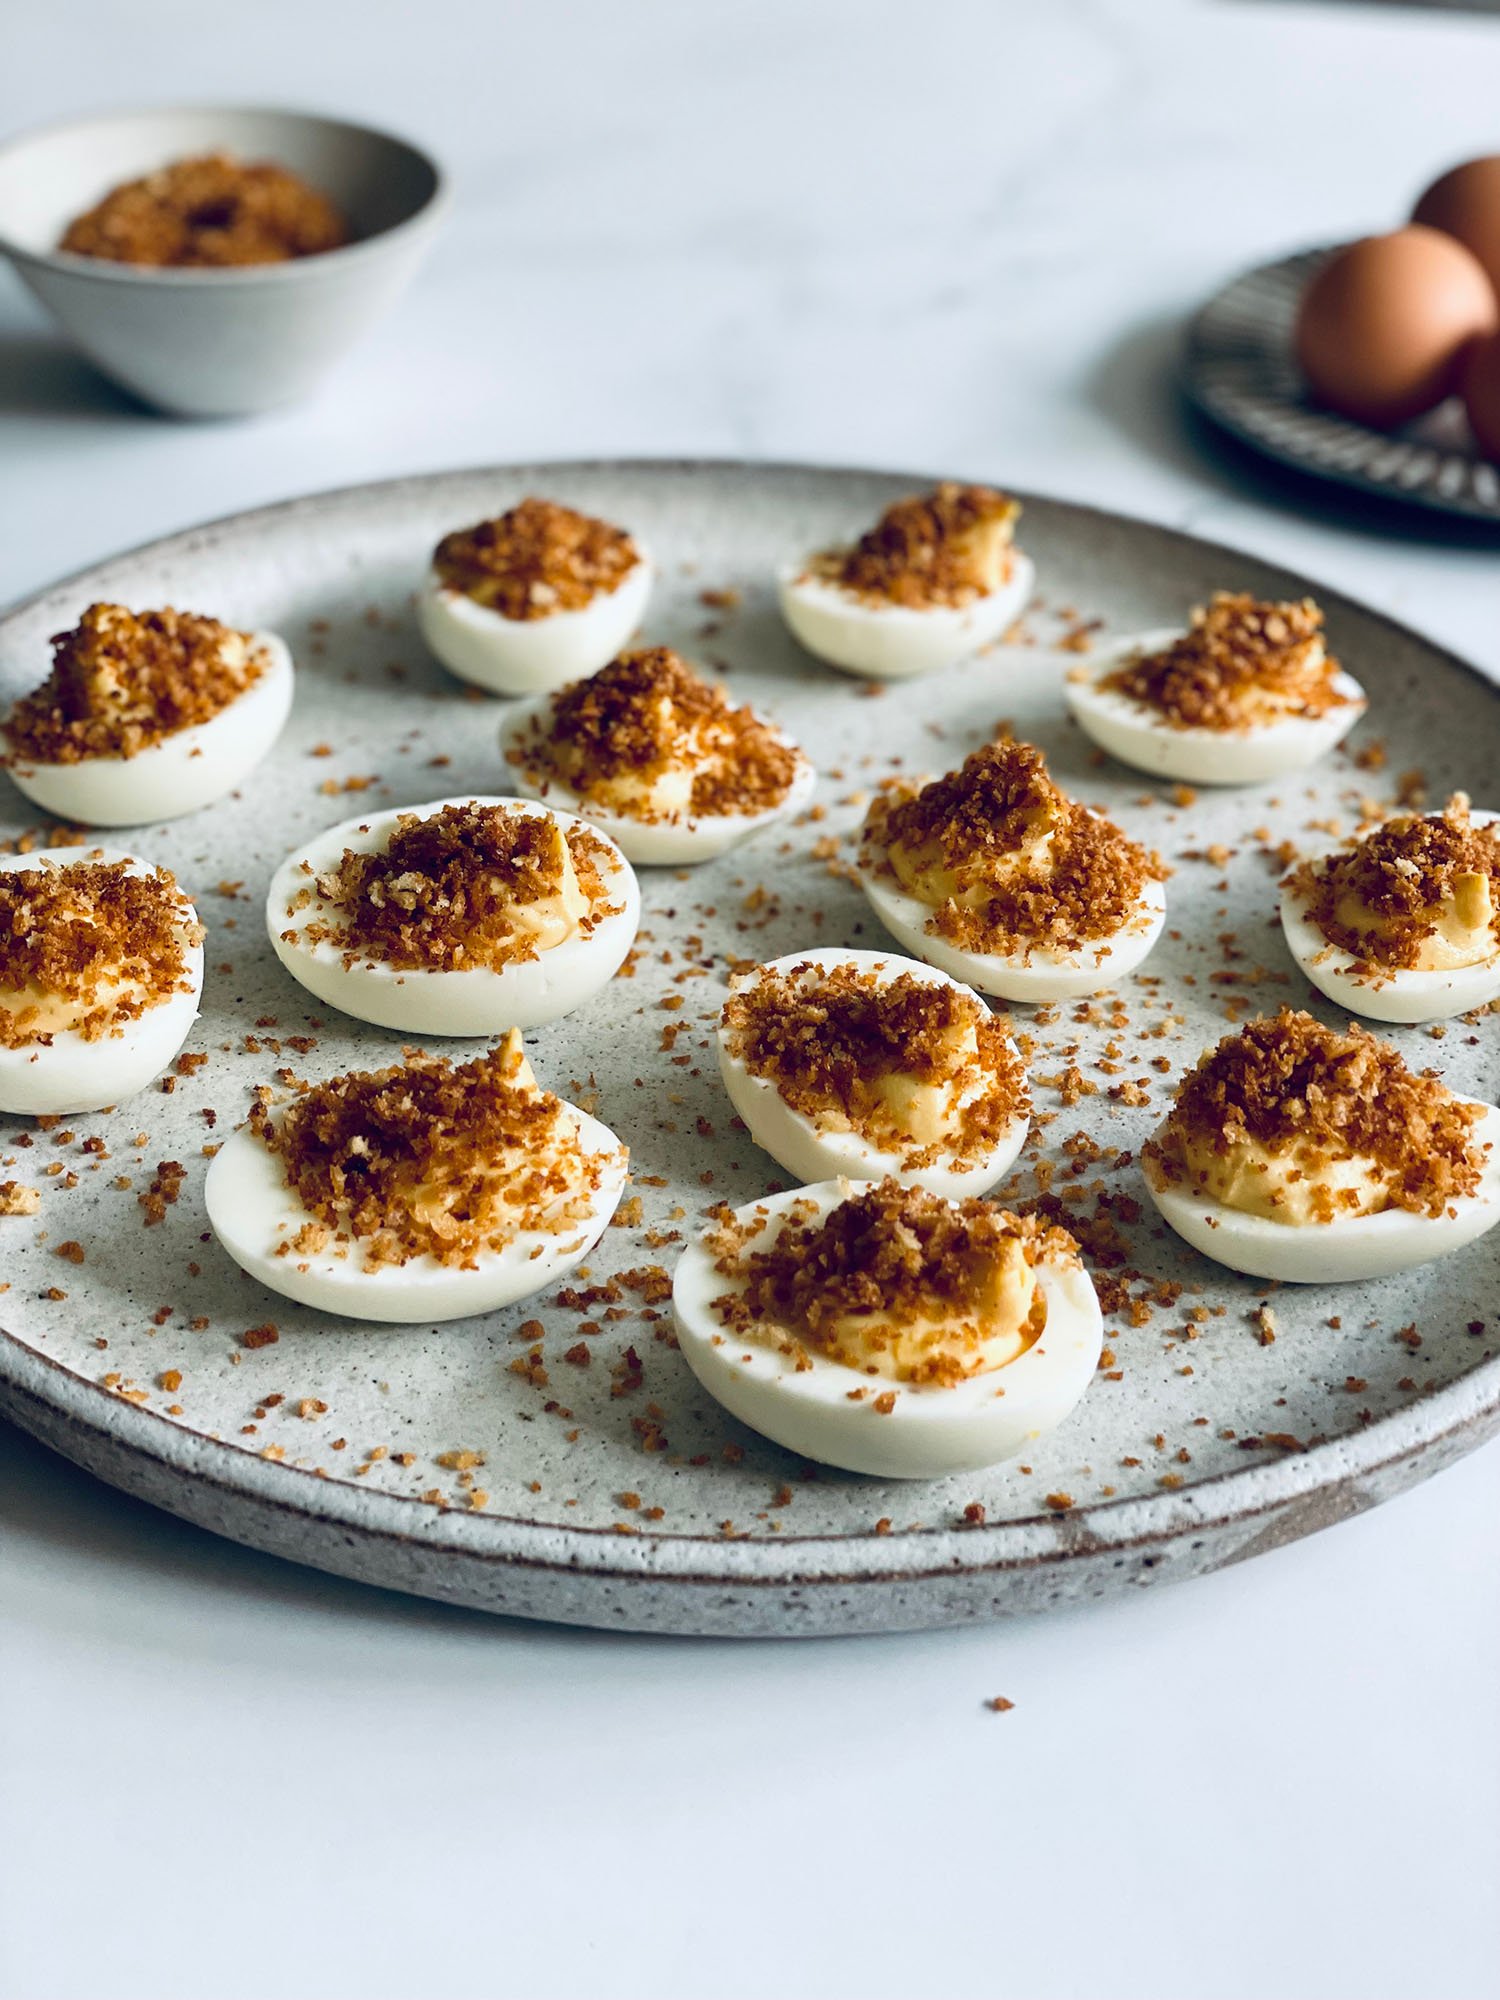 Deviled Egg with Labneh Vanilla Whipped Yolks and Smoky Panko Peter Som